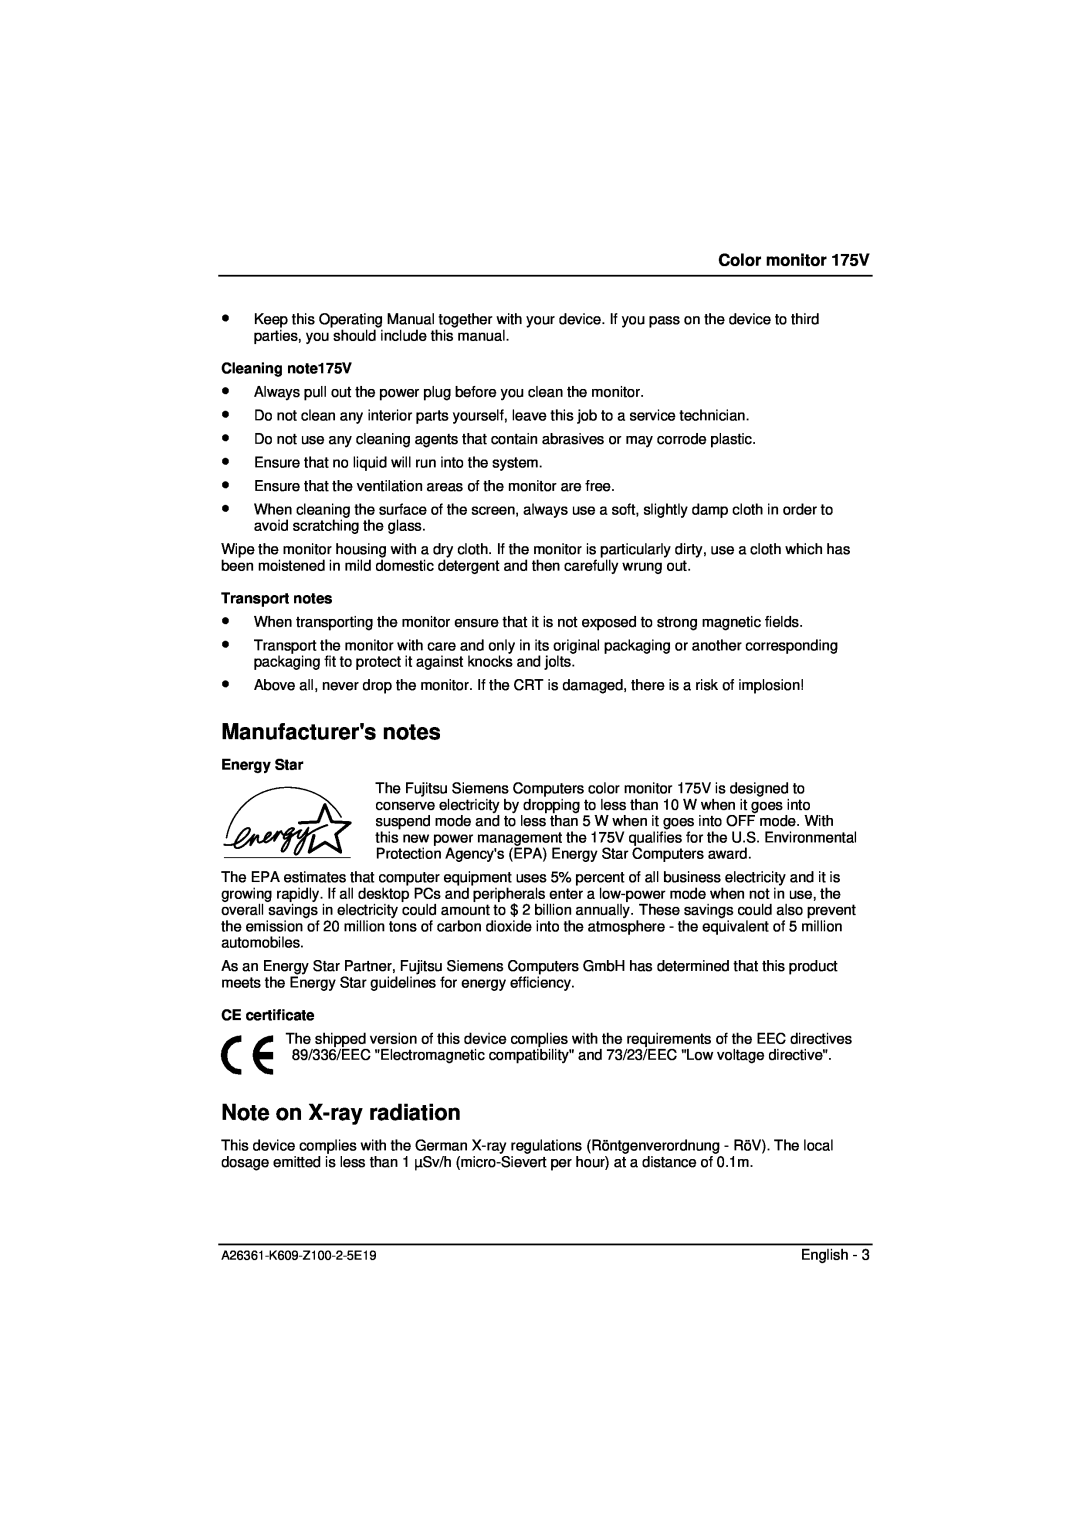 Siemens Manufacturers notes, Note on X-ray radiation, Cleaning note175V, Transport notes, Energy Star, CE certificate 